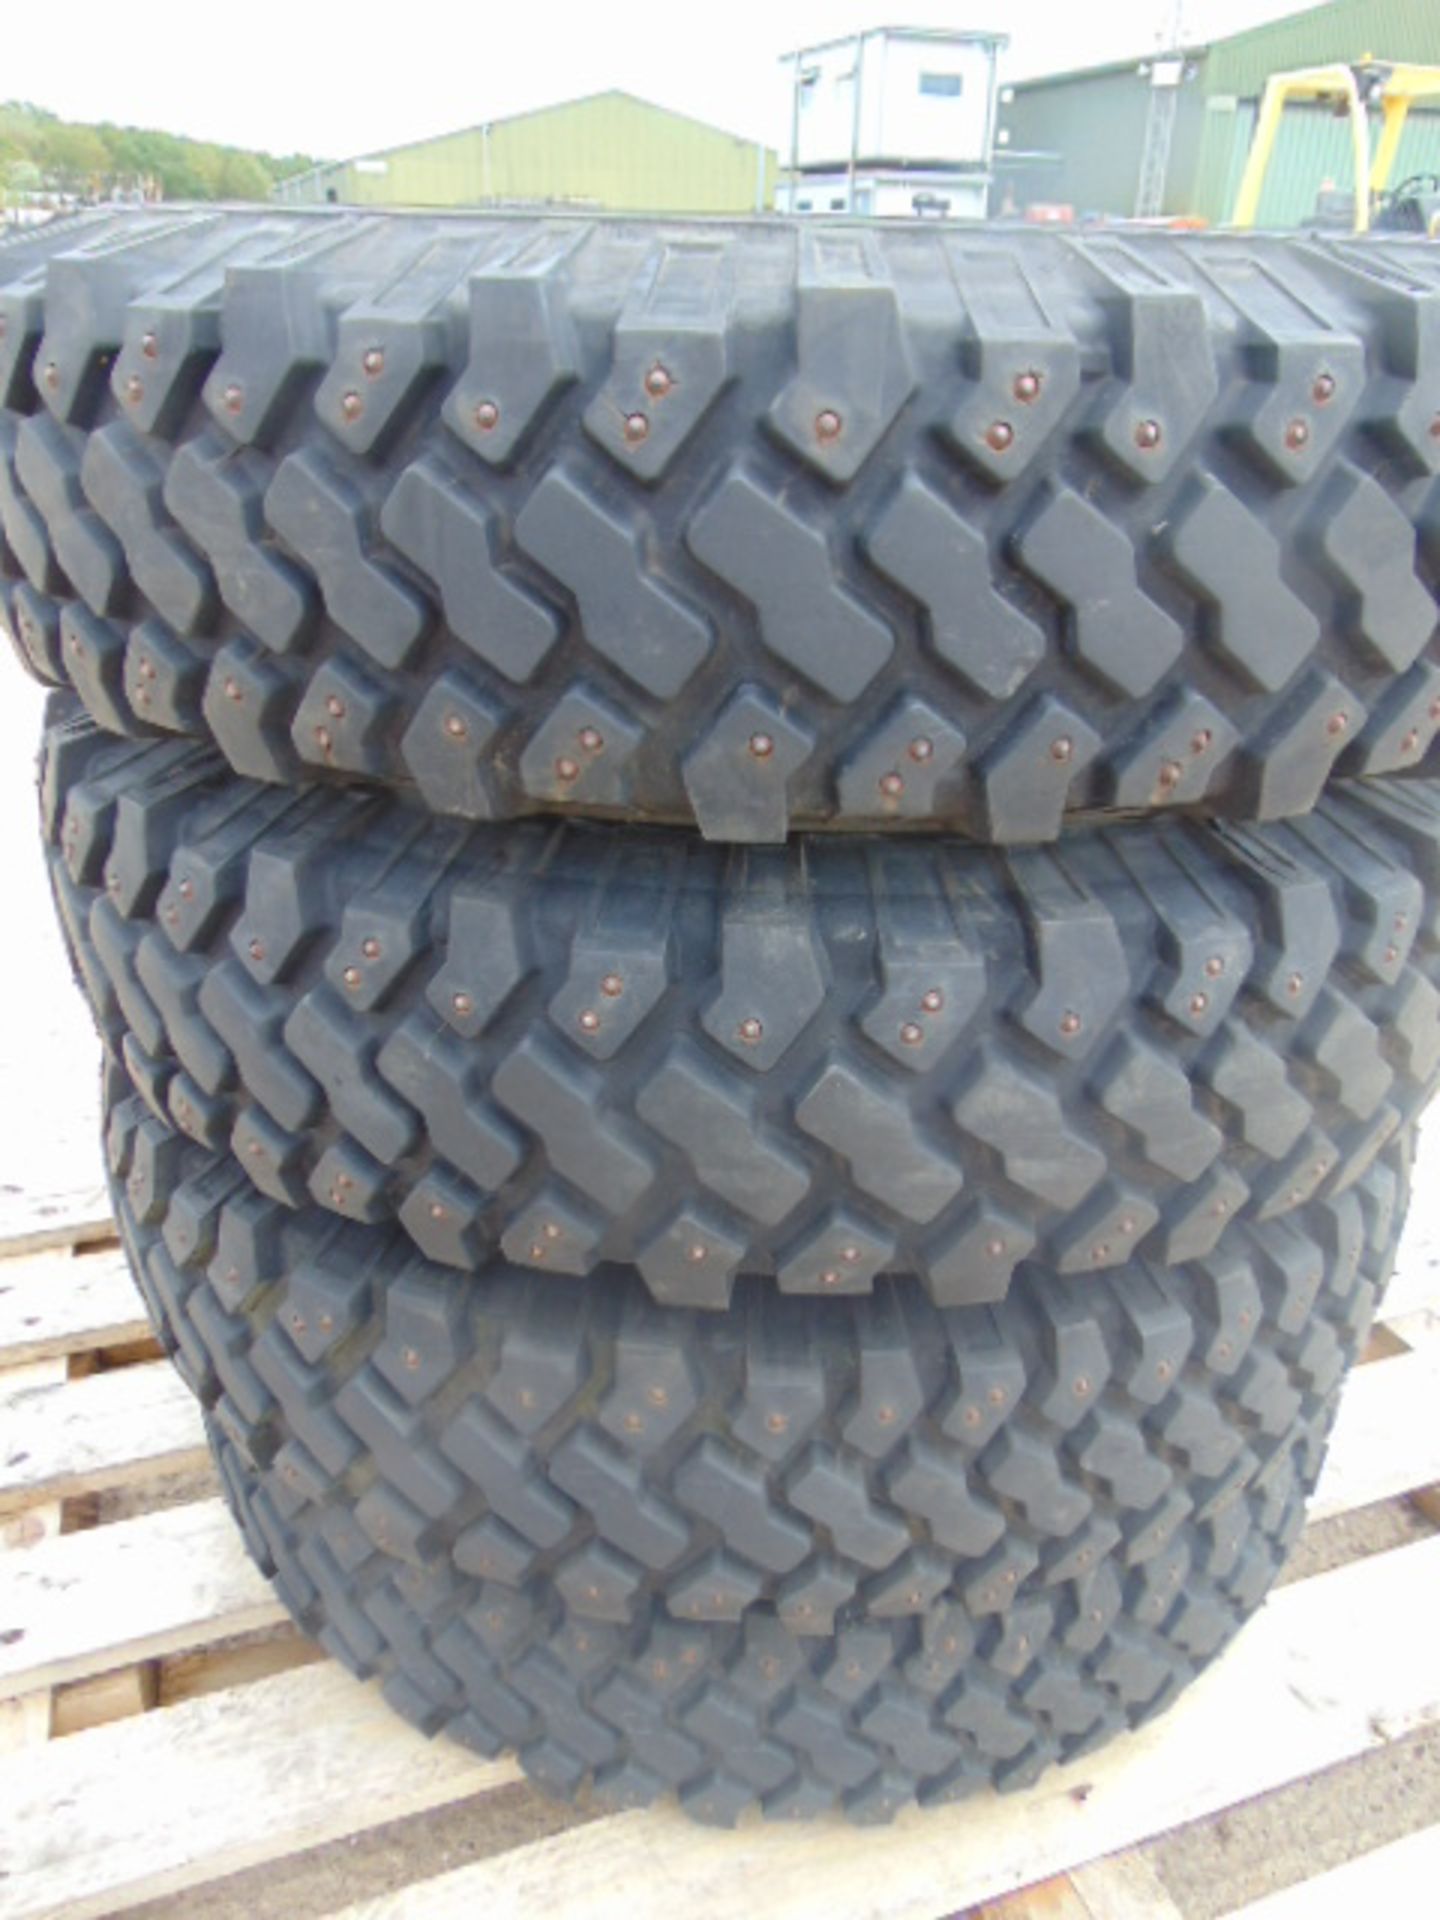 4 x Michelin 7.50 R16 XCL Winter/Studded Tyres - Image 7 of 8